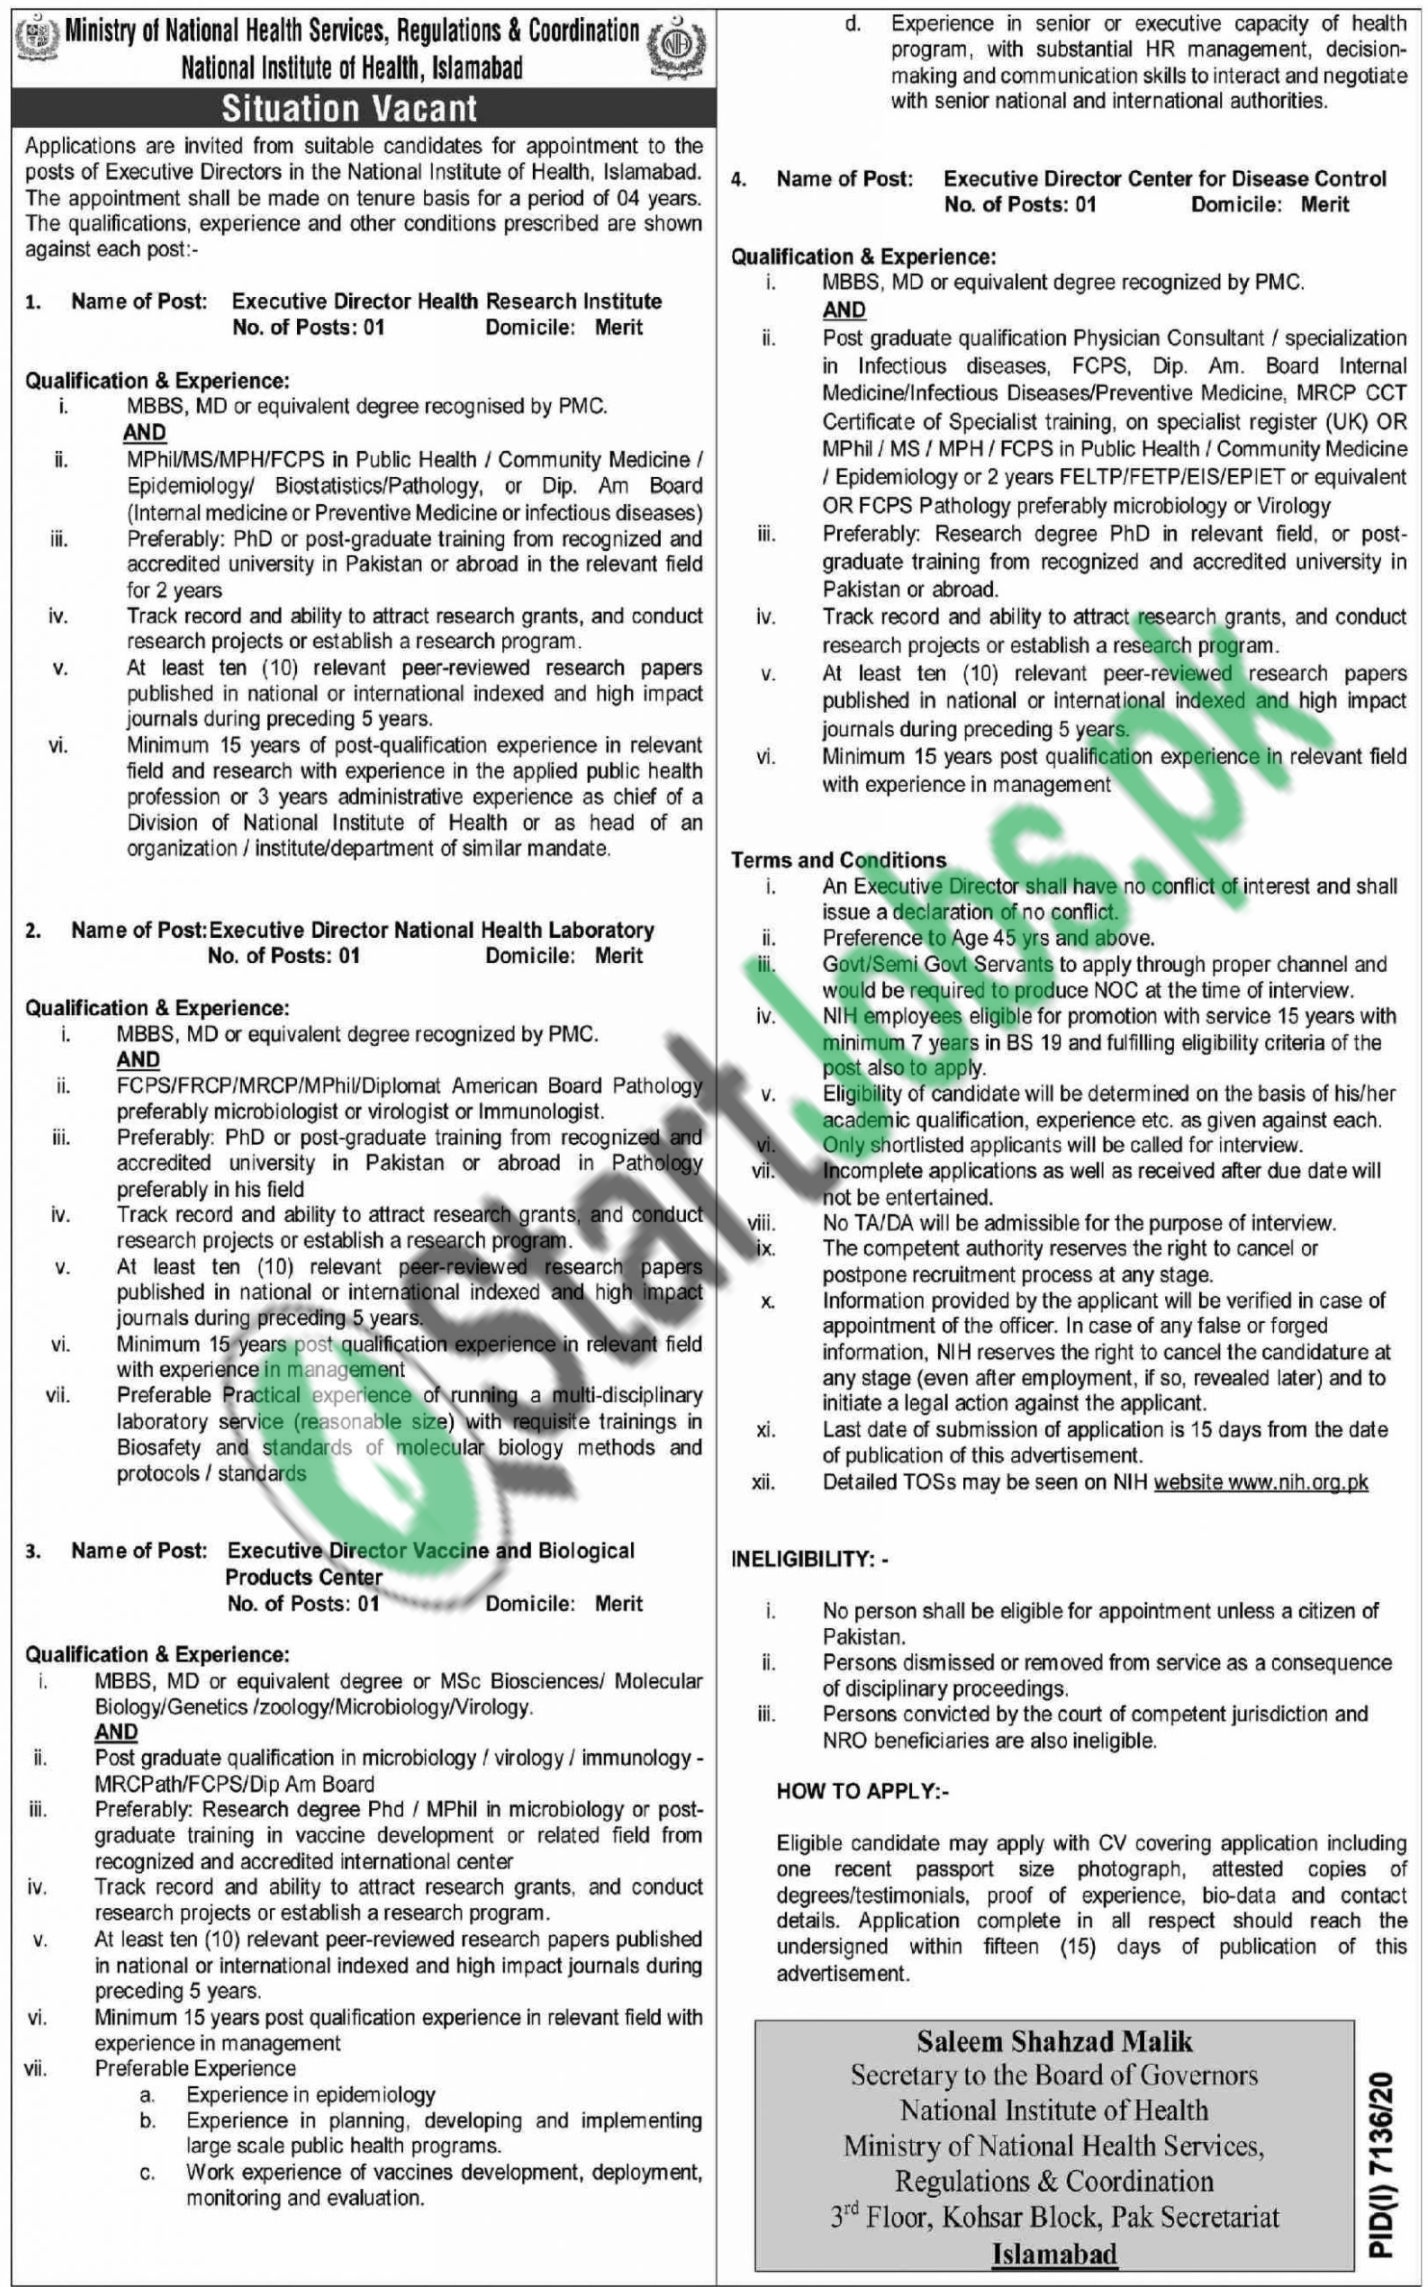 Ministry of National Health Services Jobs 2021